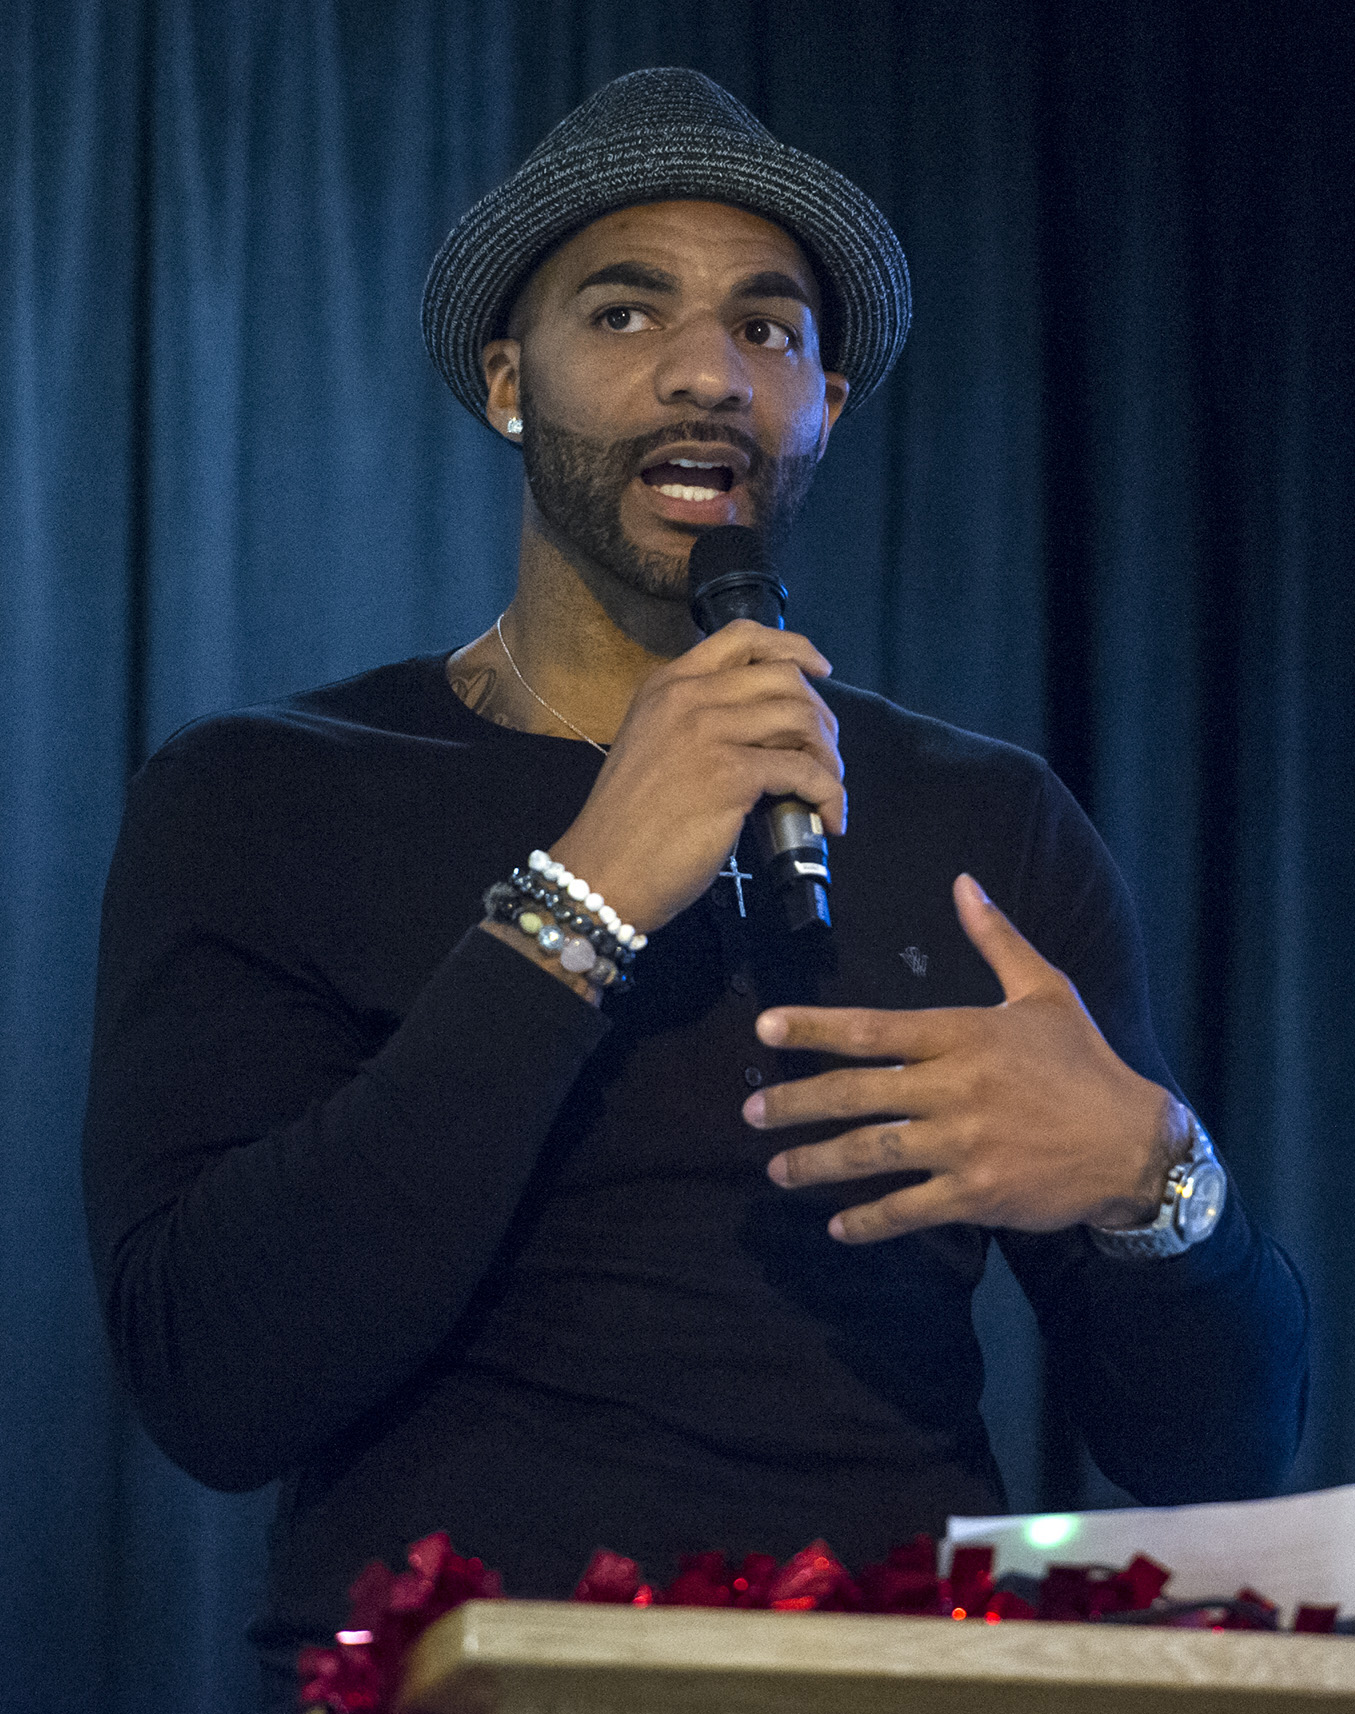 Former NBA all-star and Juneau-Douglas High School standout Carlos Boozer made a surprise visit during the JDHS Basketball Awards Banquet at the Elizabeth Peratrovich Hall on Tuesday evening. Boozer came to help celebrate the team’s first state championship since he helped JDHS win one 18 years ago.